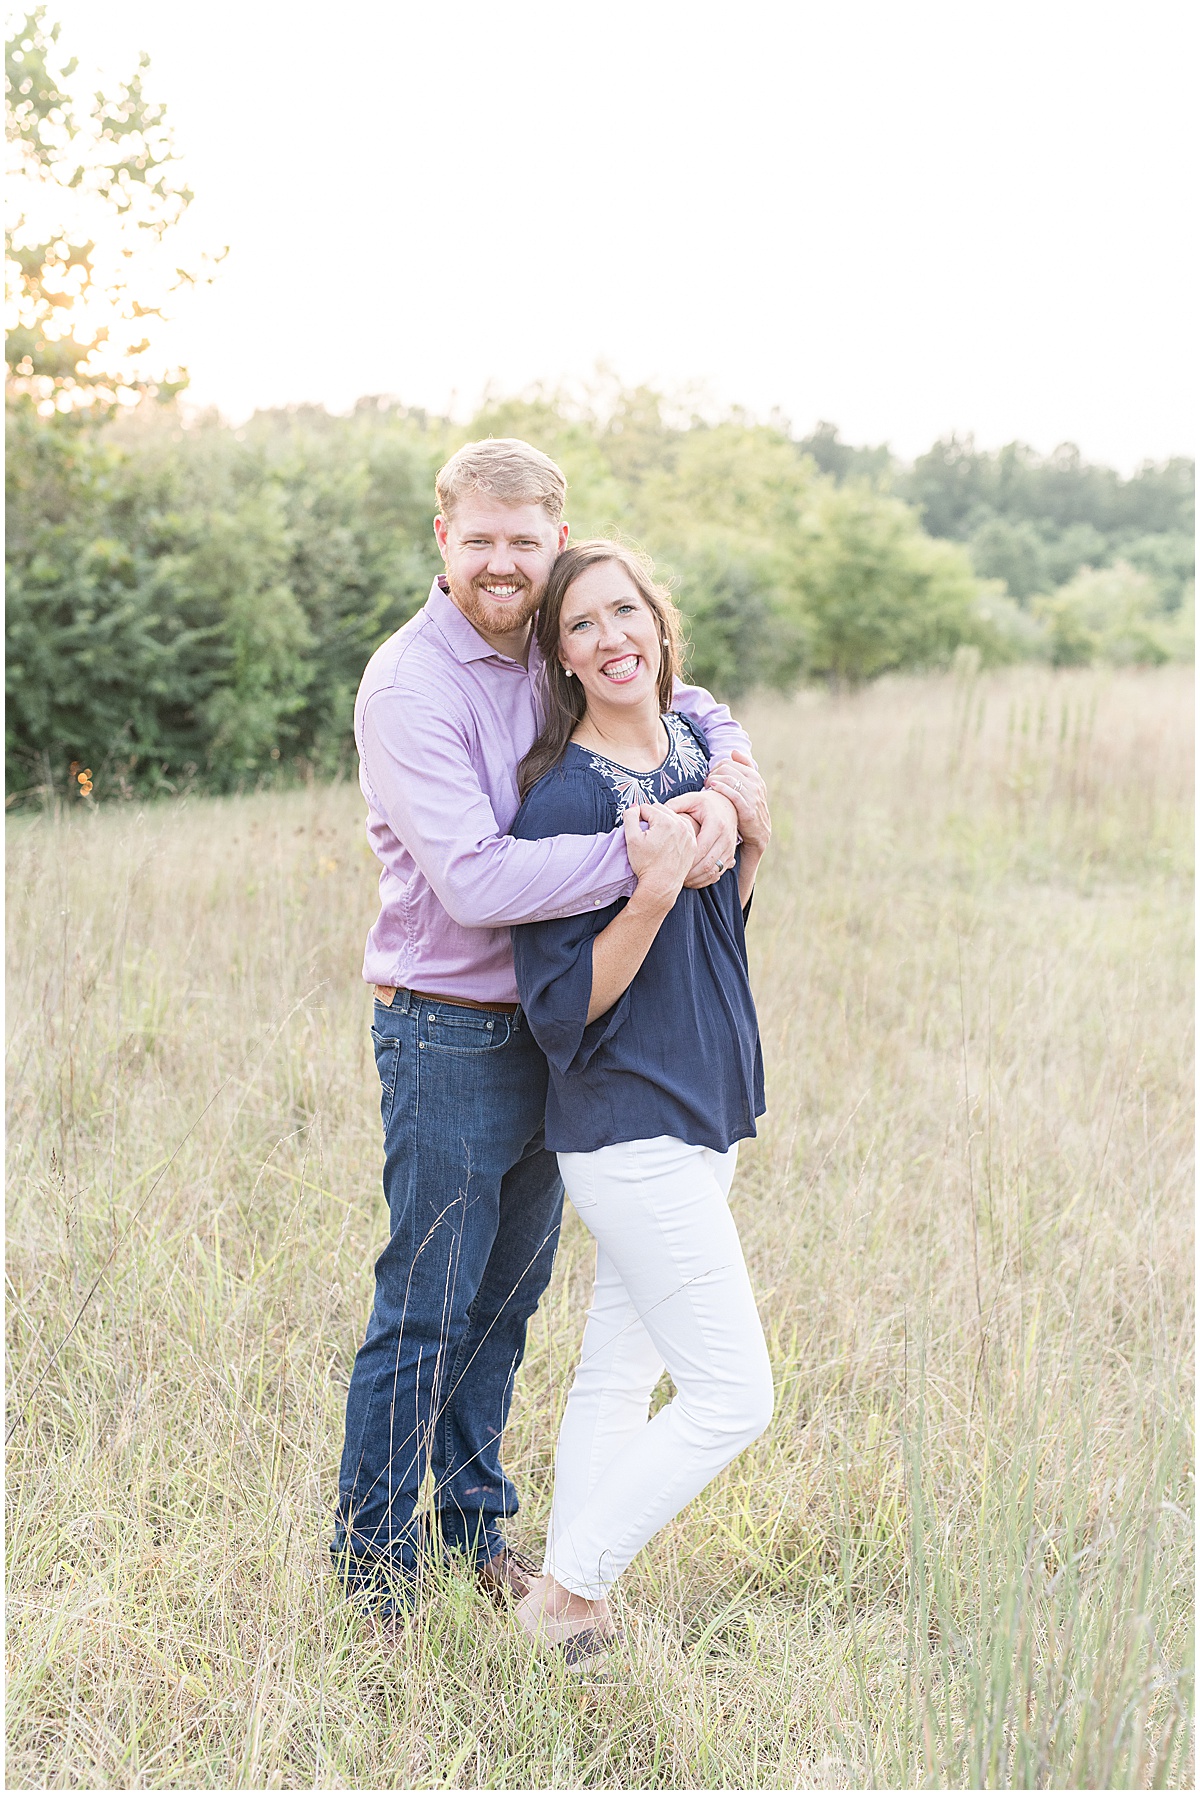 Anniversary photos at Fairfield Lakes Park in Lafayette, Indiana